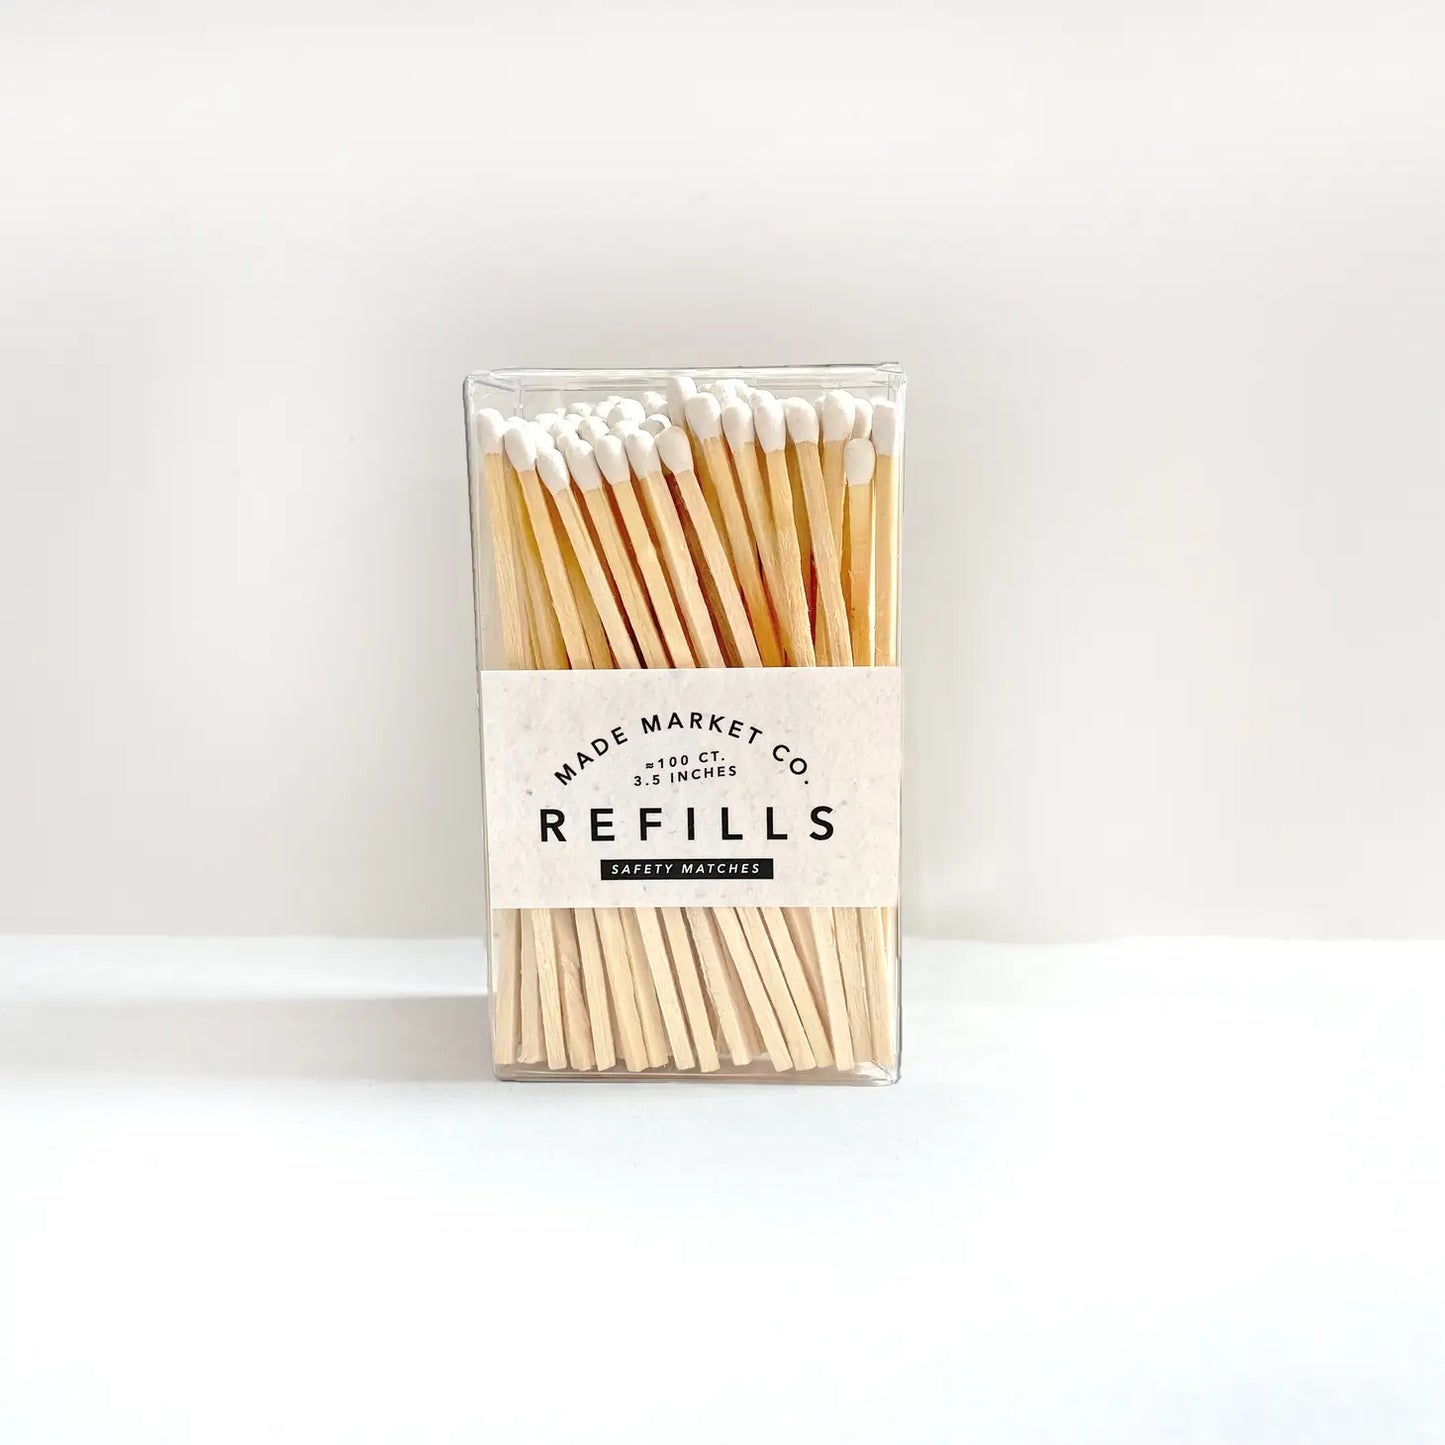 Refills of Wooden Safety Matches